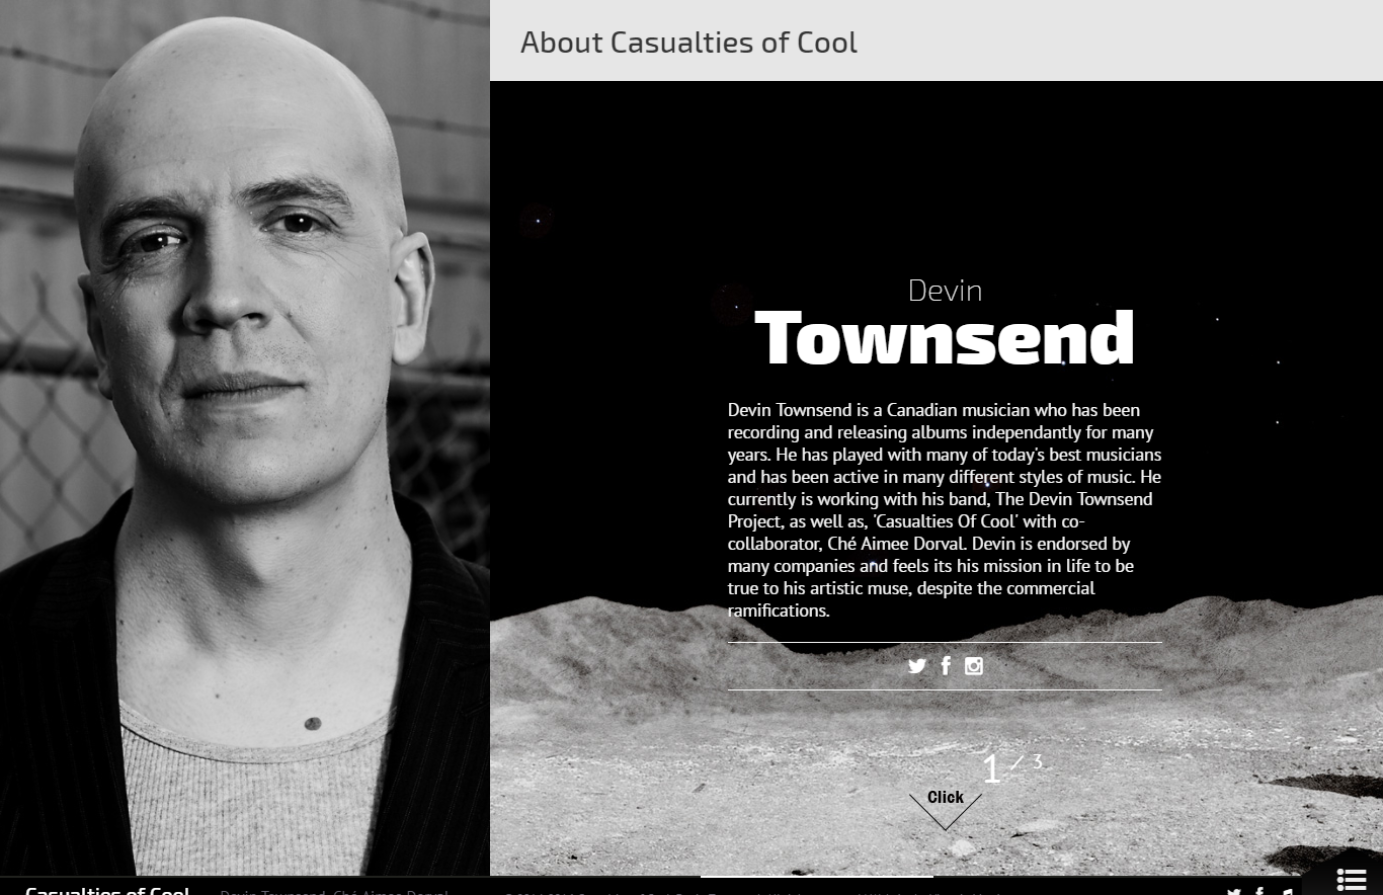 Website for Casualties of Cool by victimlas